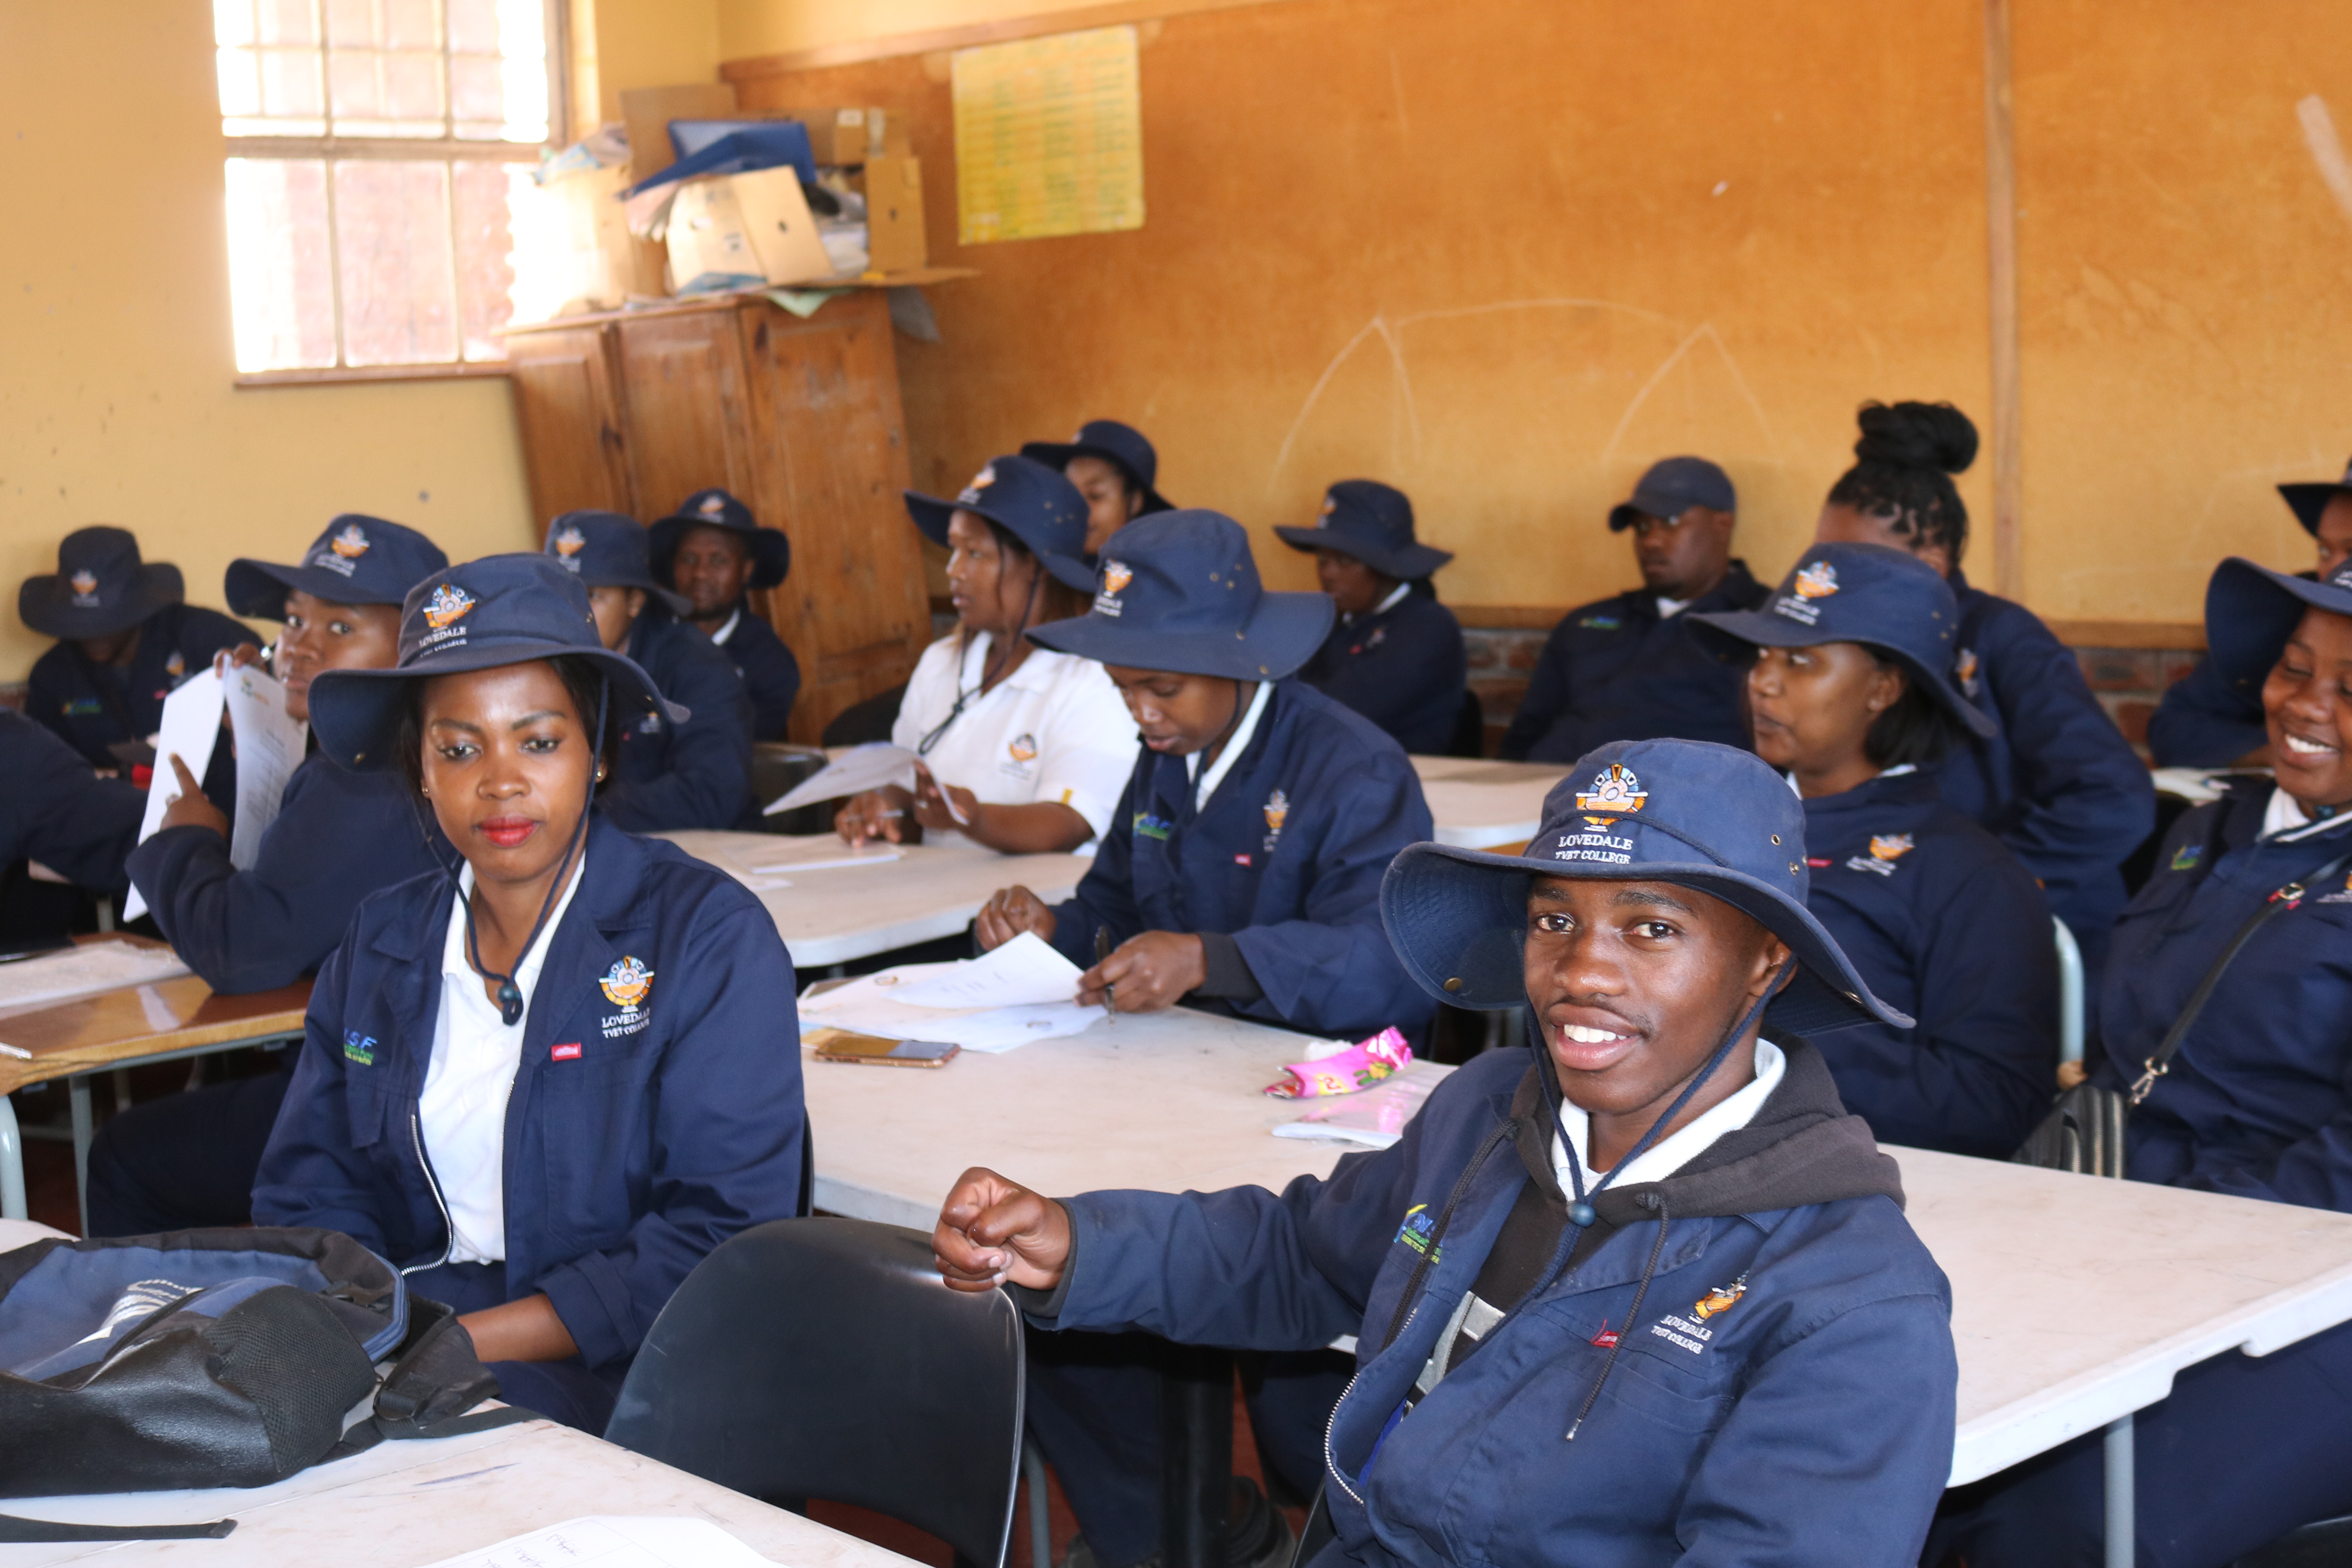 Above: Animal Production learnership students at the learning site.